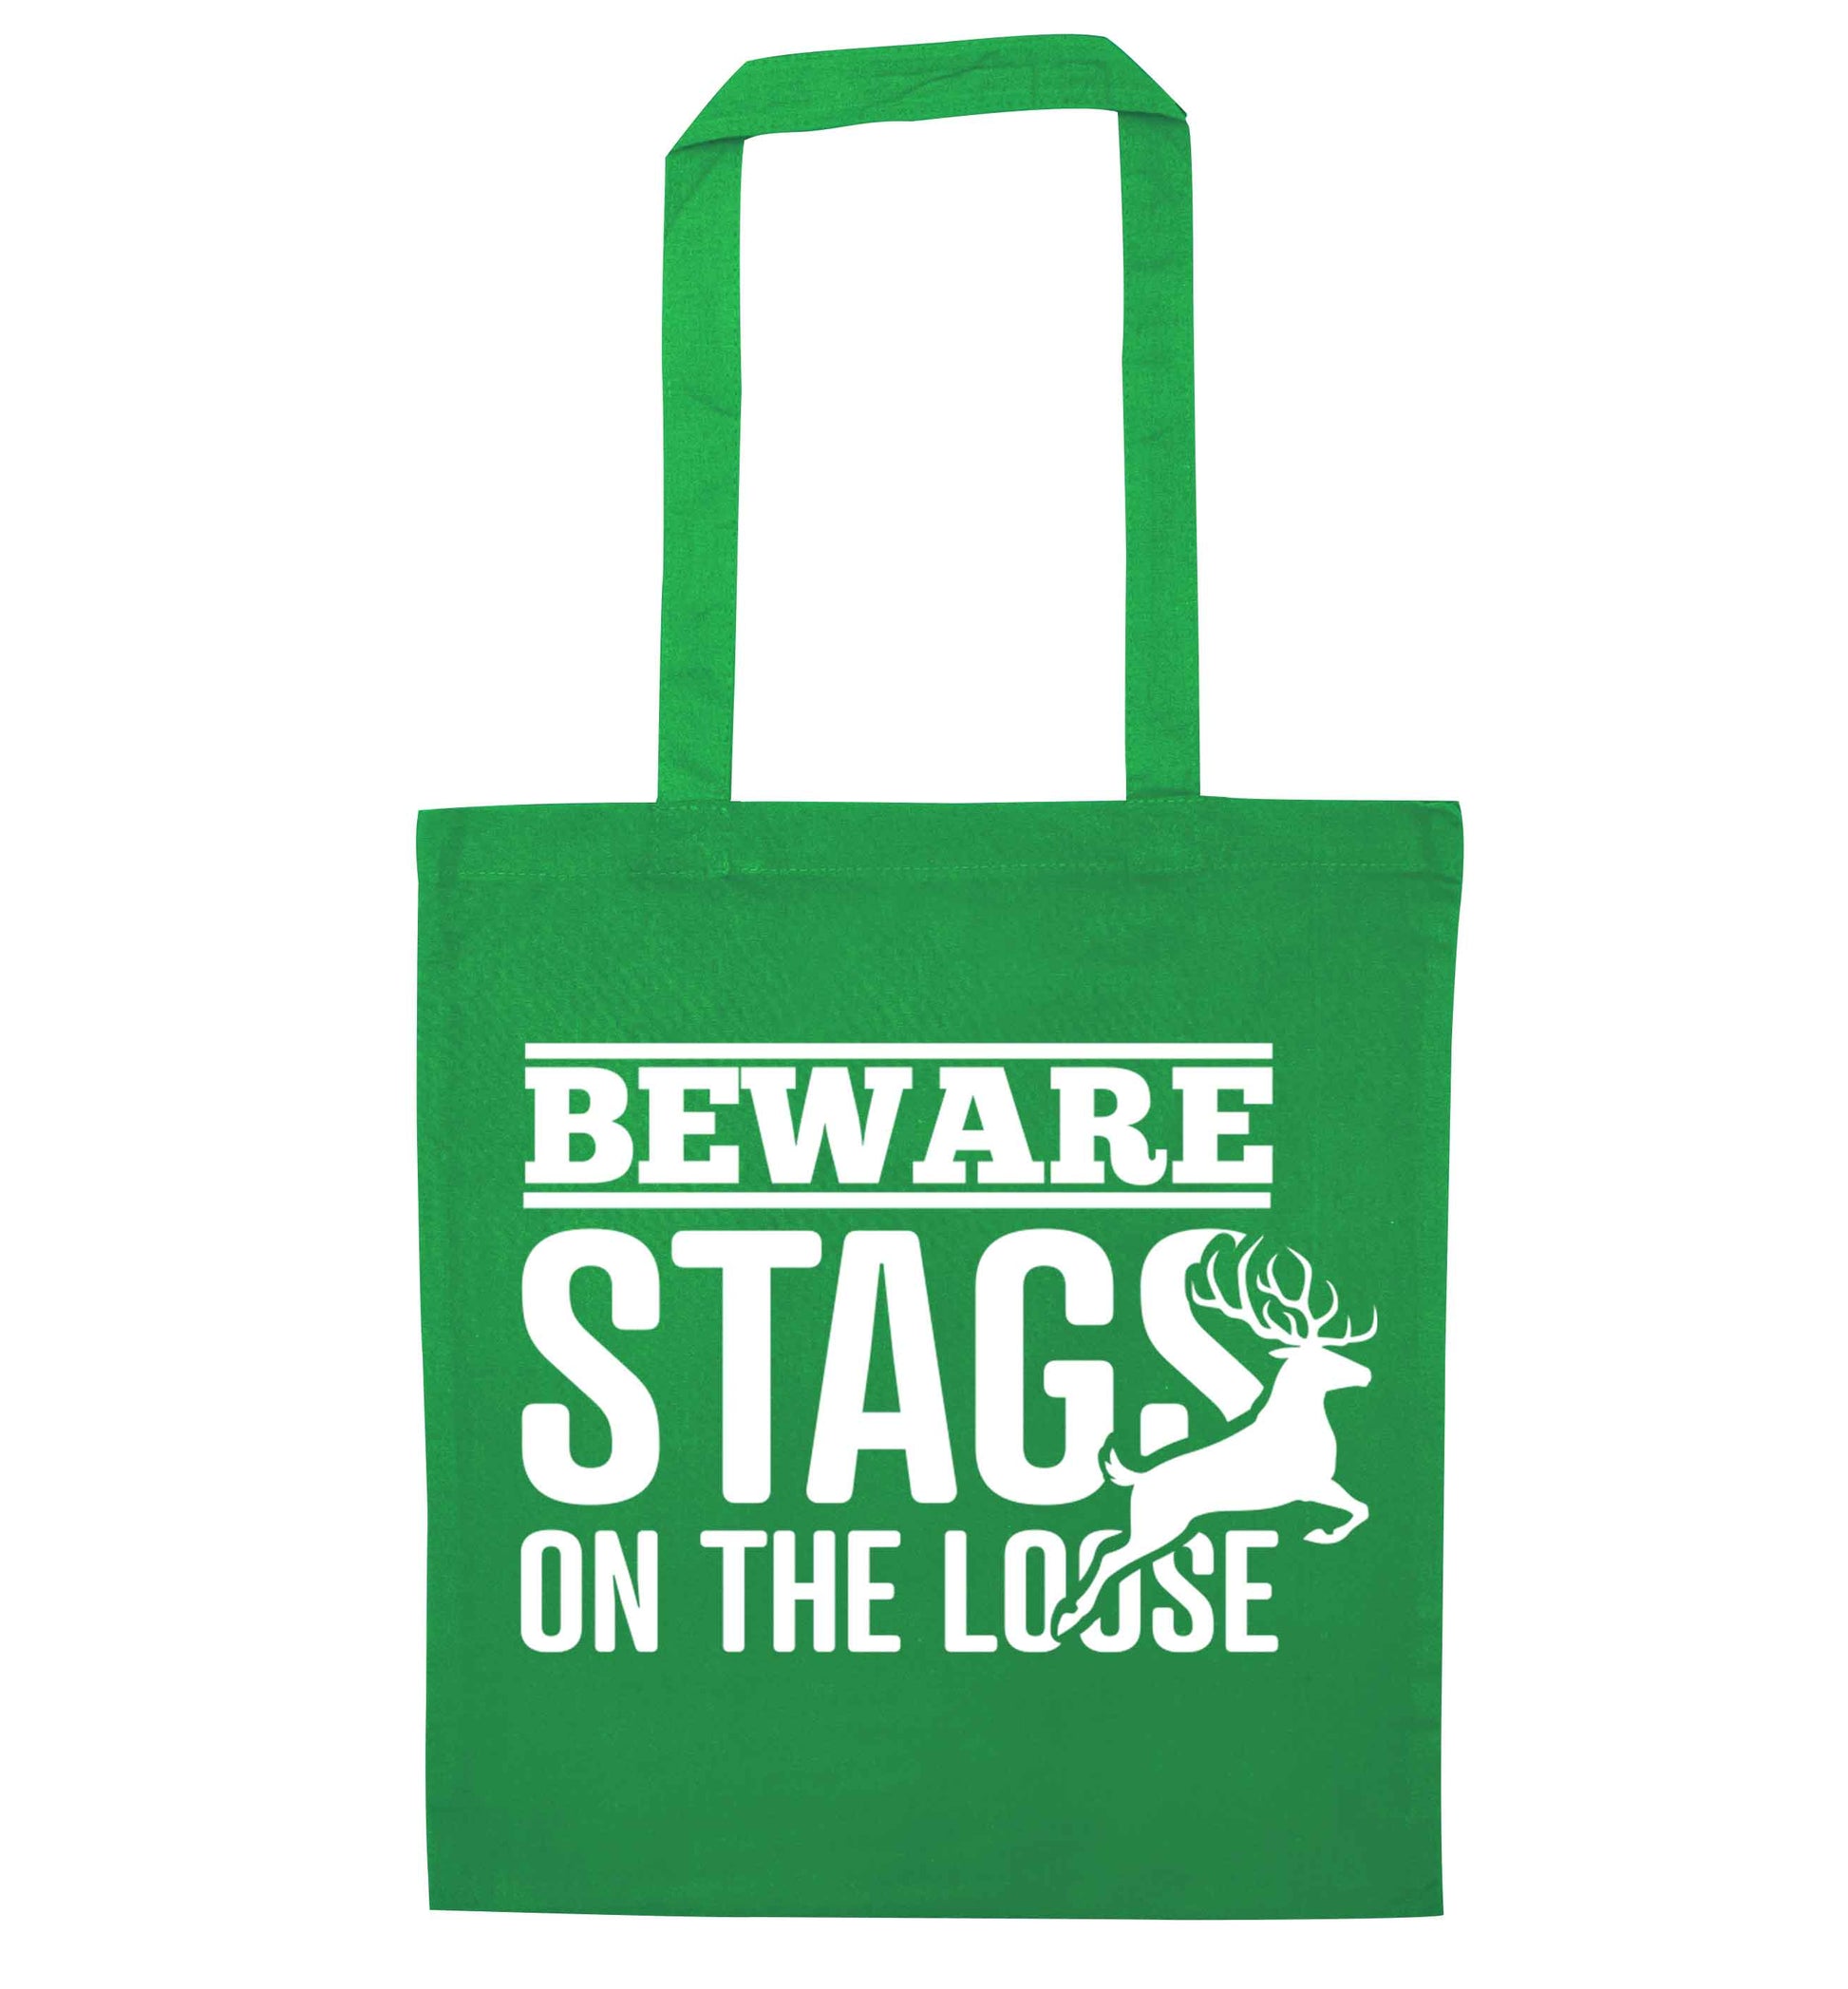 Beware stags on the loose green tote bag